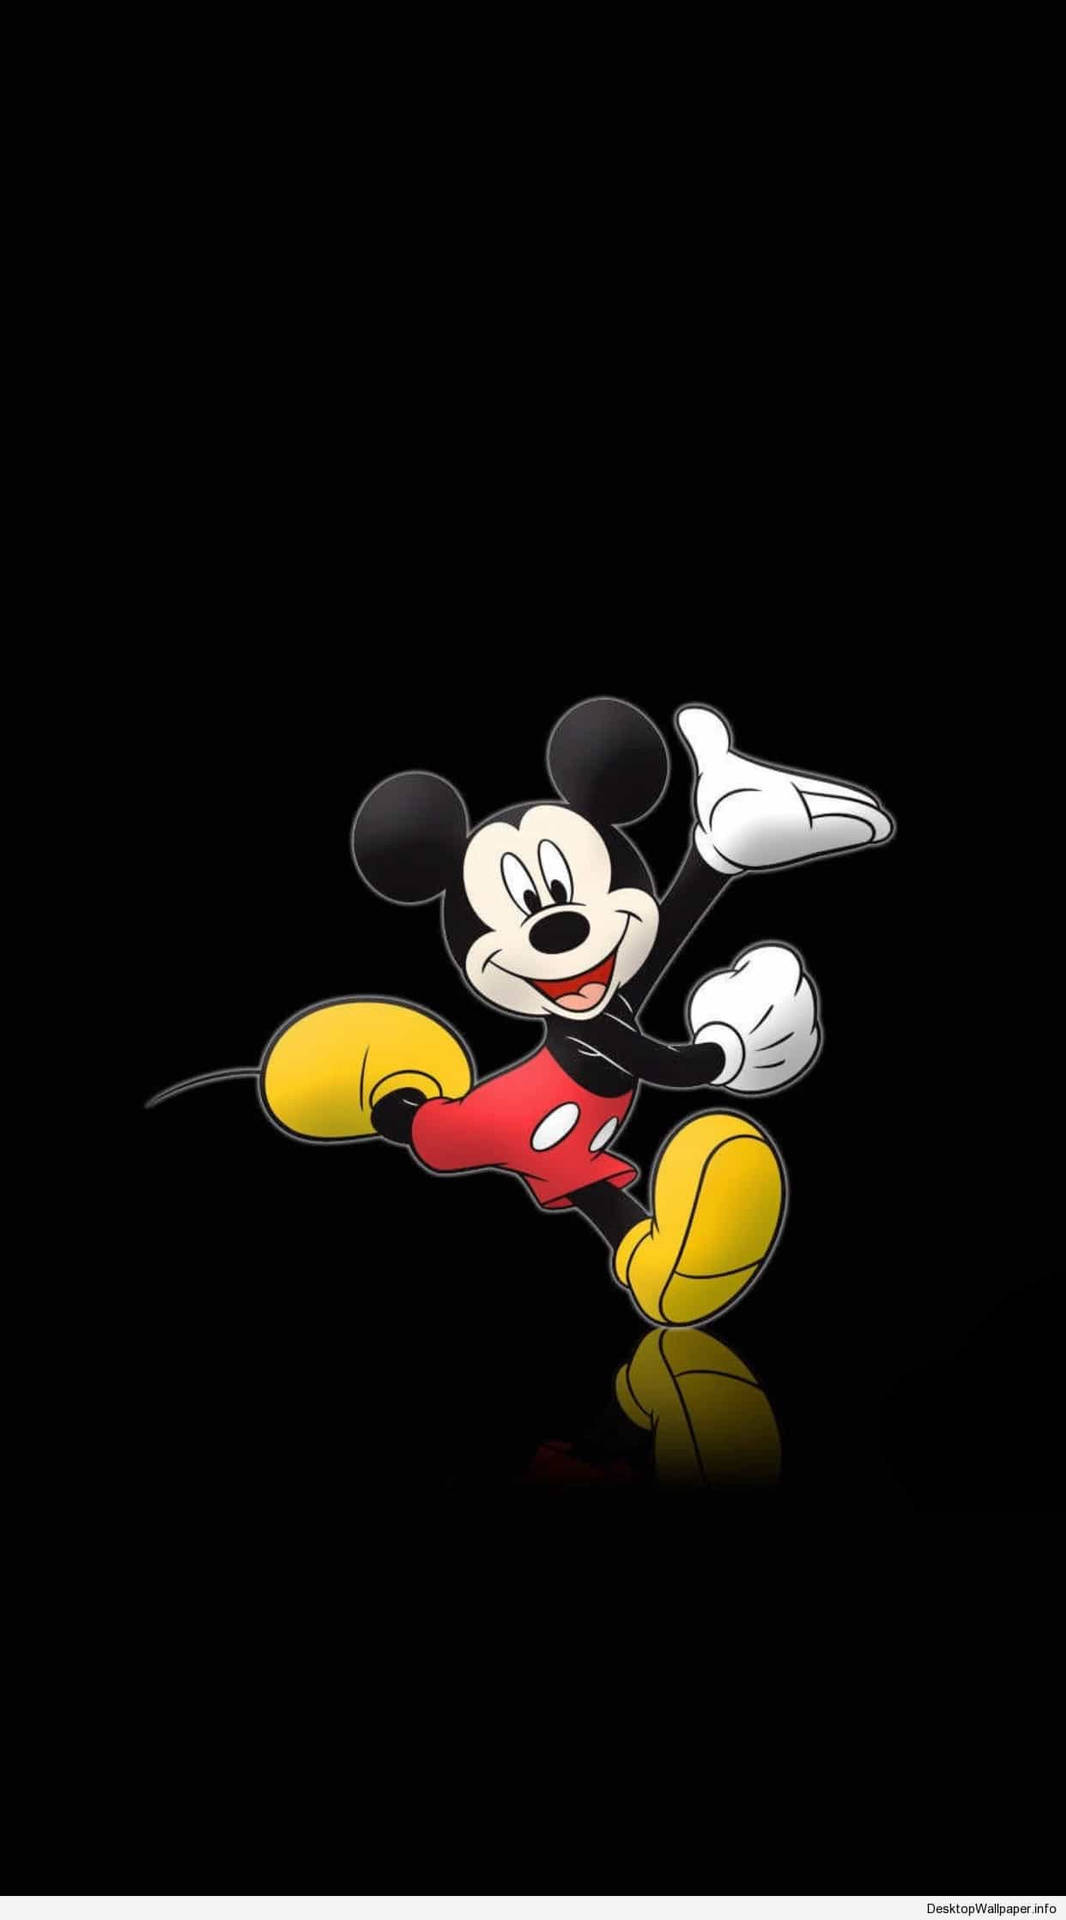 Mickey Mouse On Black Background Wallpaper